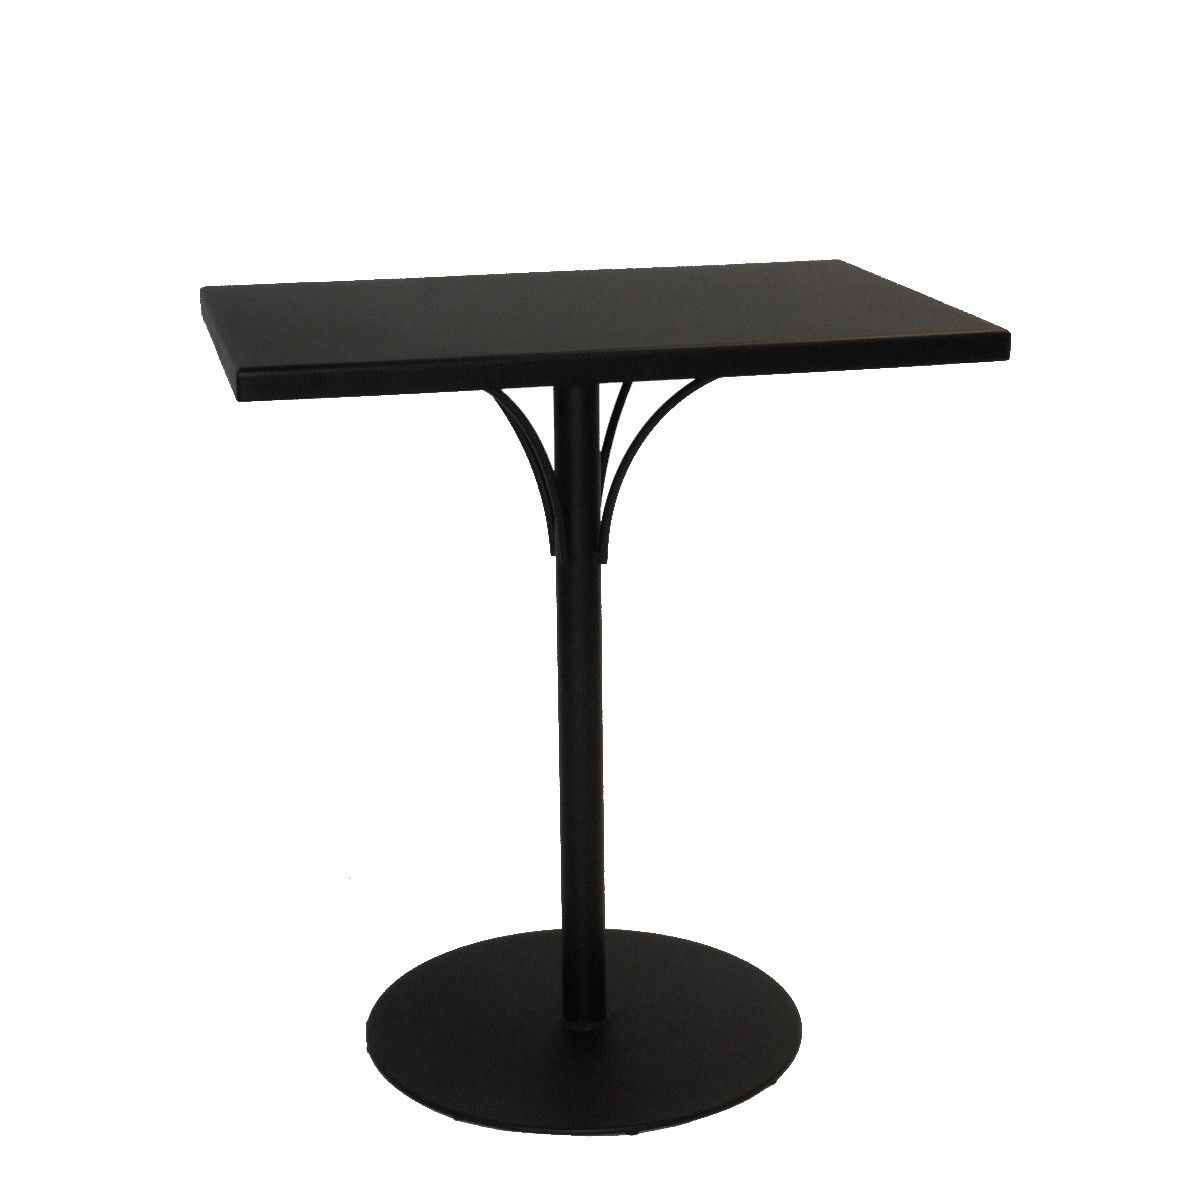 Bar Height Pedestal Dining Tables With Widely Used Aluminum Solid Top 24" X 36" Bar Height Table With (View 11 of 20)